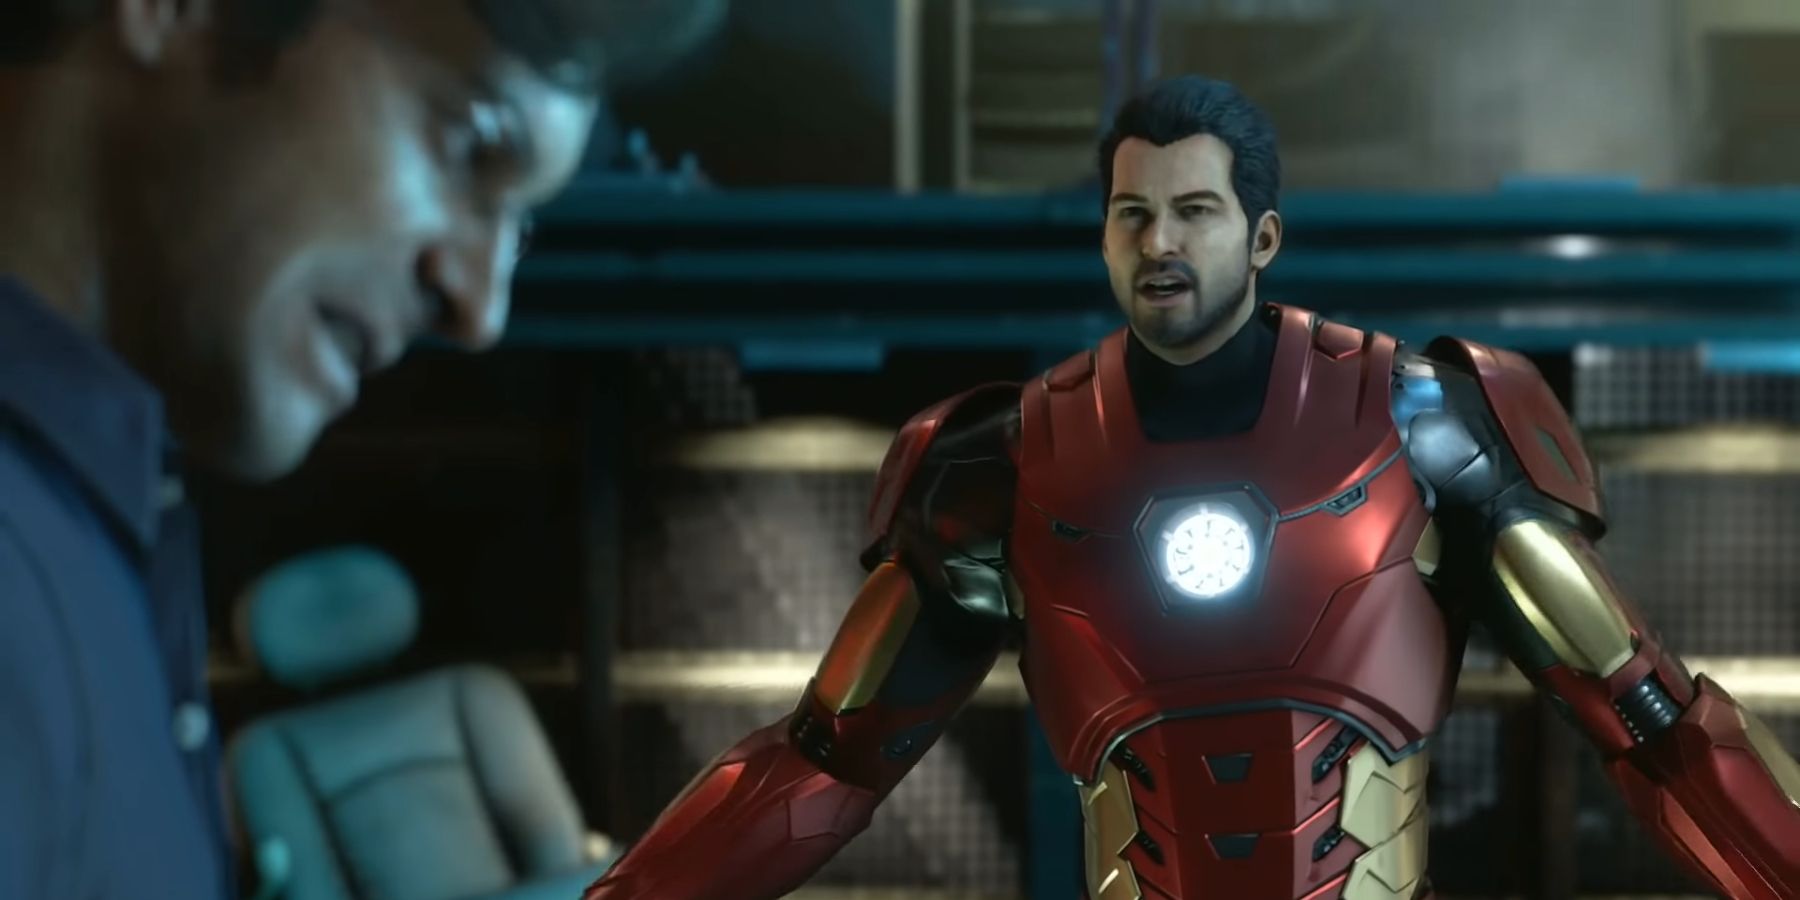 Iron Man arguing with Bruce Banner in Marvel's Avengers